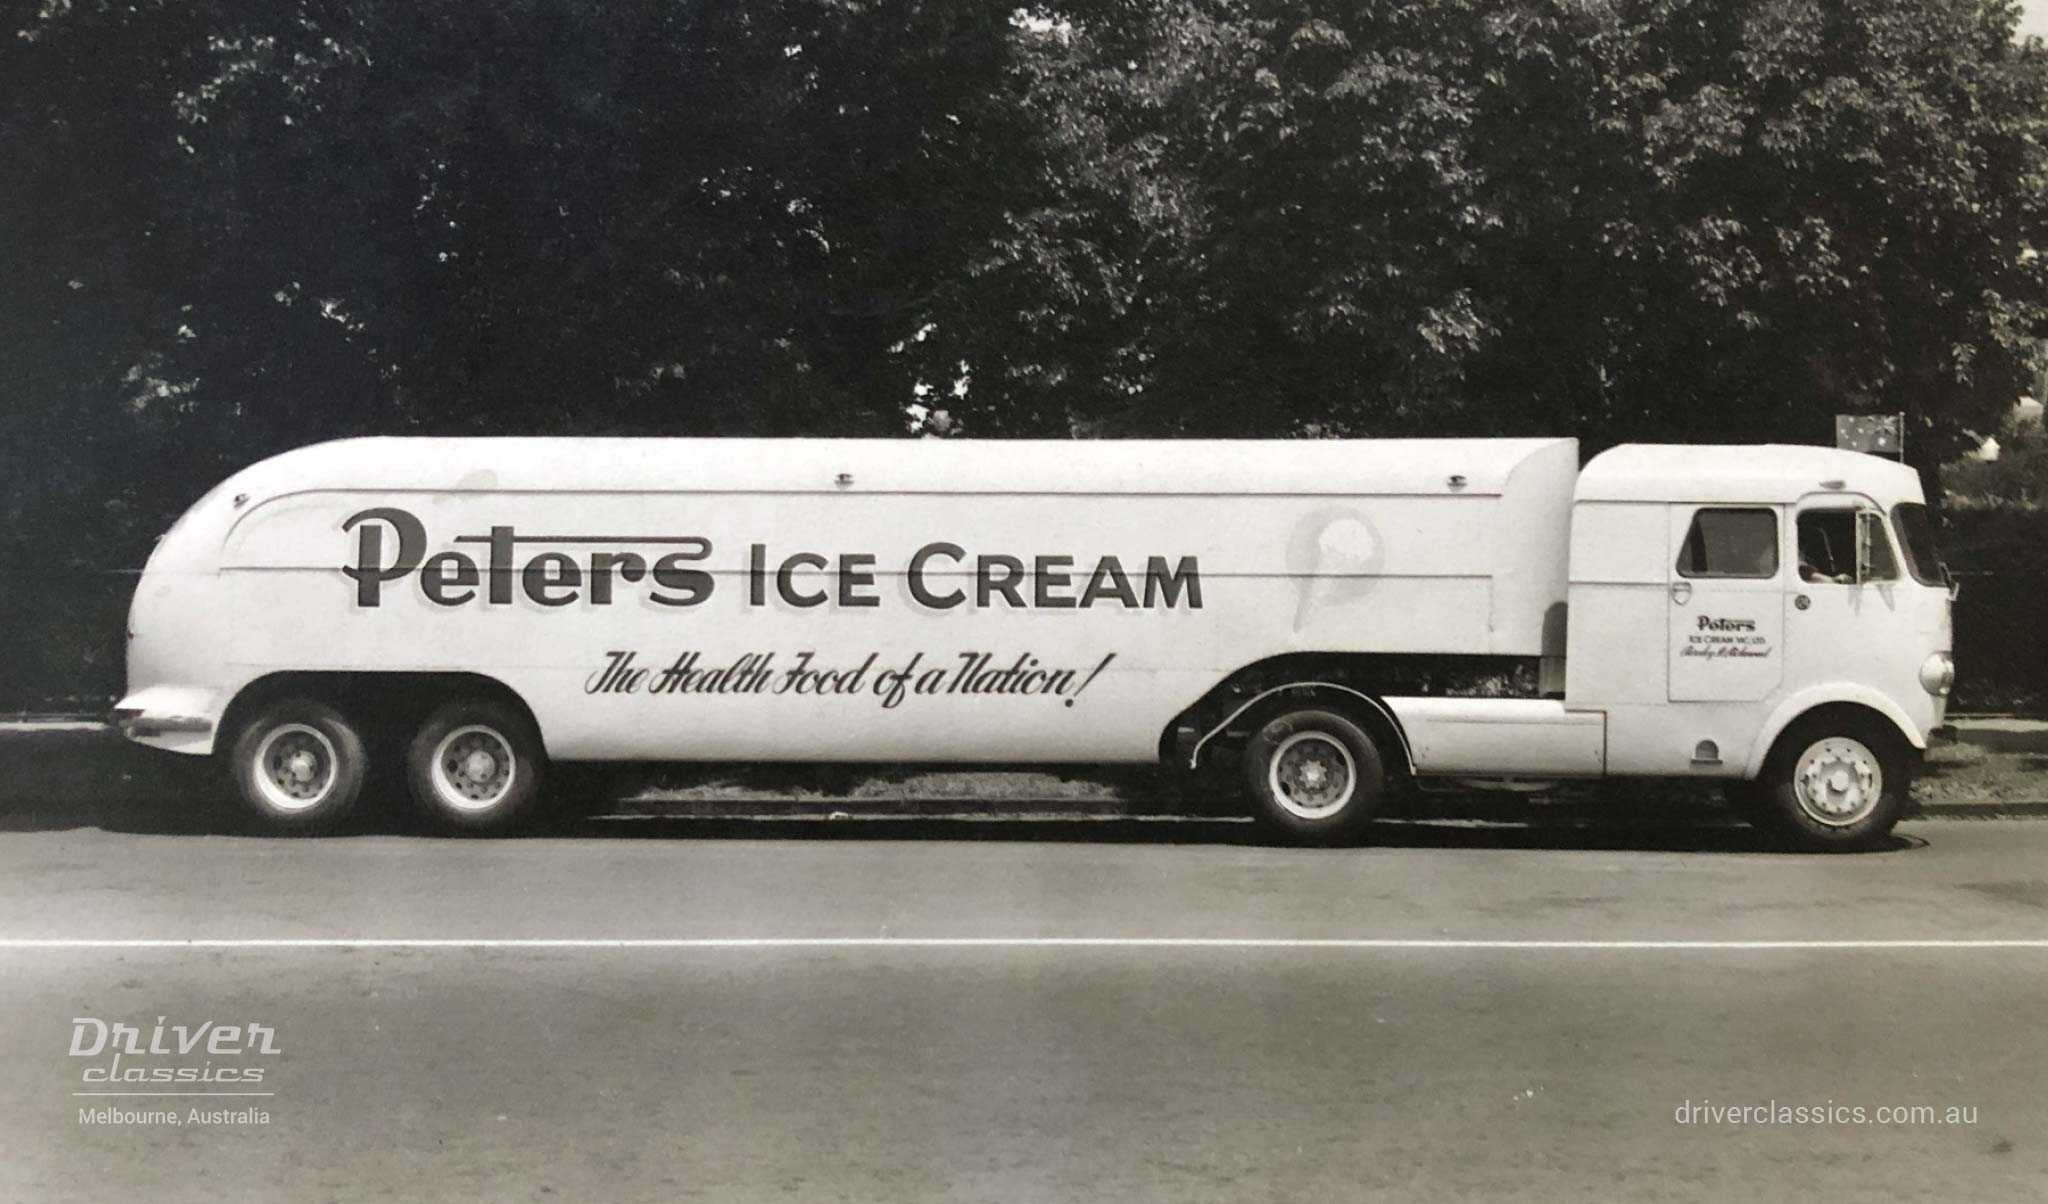 1950s Ansair truck for Peter’s Ice Cream with Flxible Clipper styling features, side profile